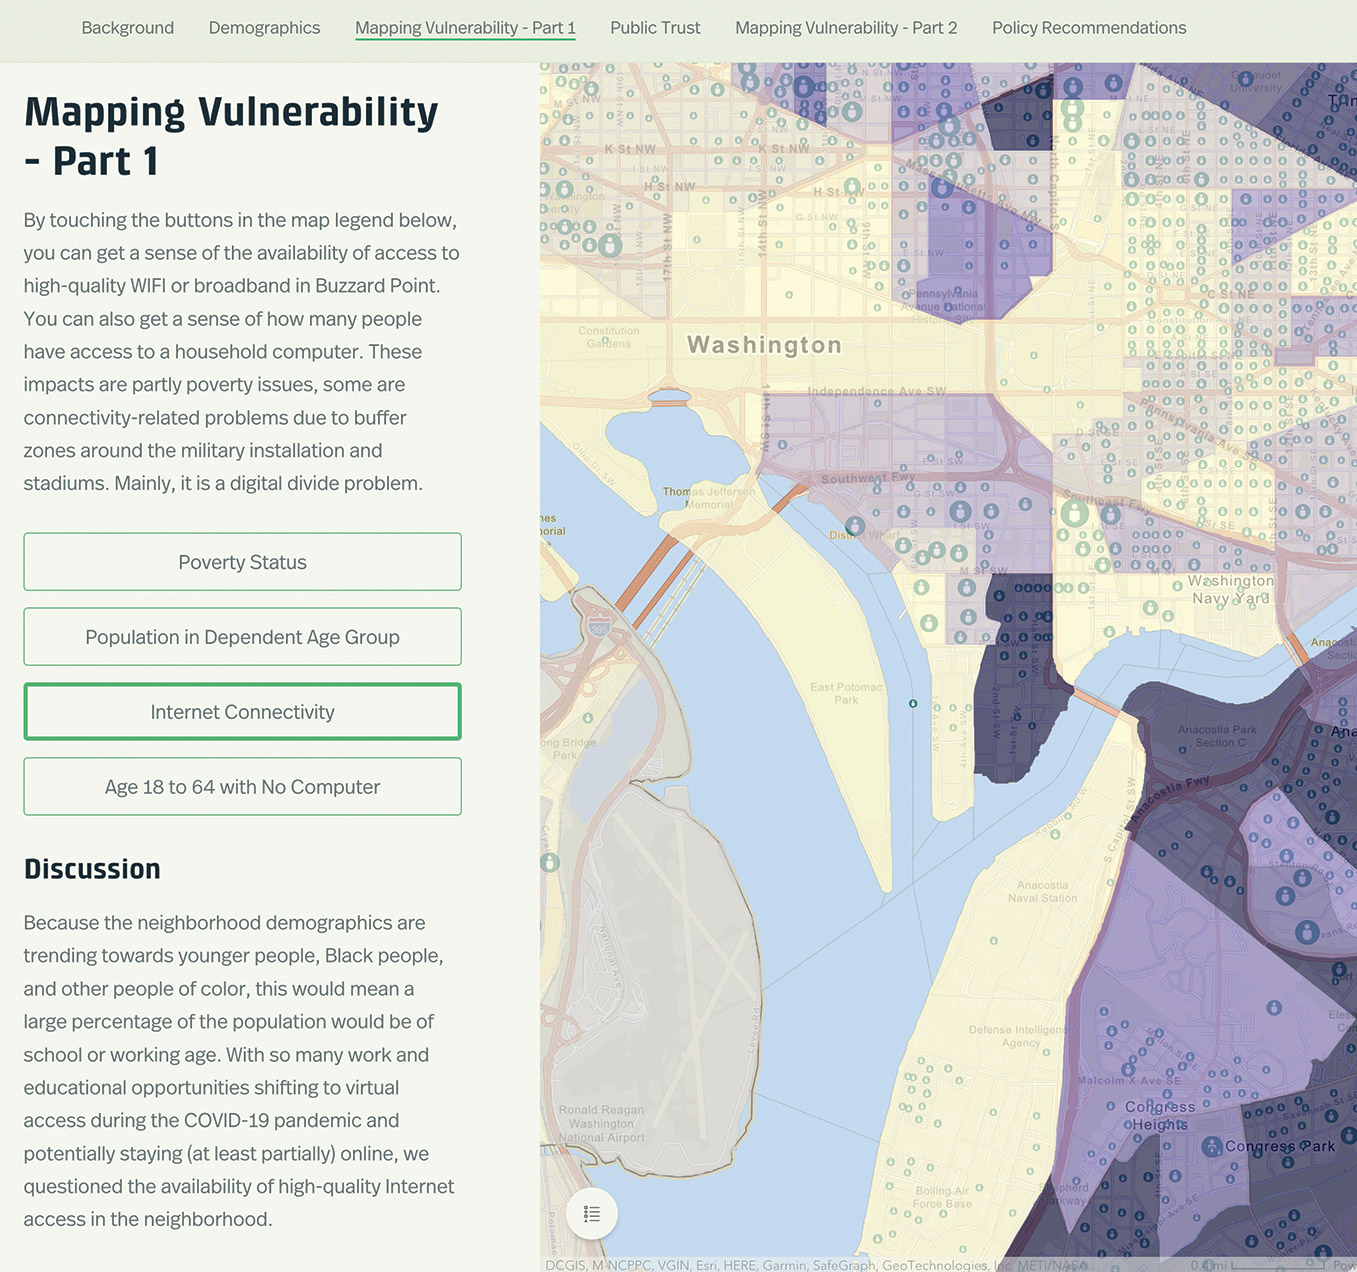 a screen shot of a map entitled "Mapping Vulnerability, Part 1." Underneath are selectors for poverty status, population in dependent age group, age 18 to 64 with no computer, and internet connectivity, which is selected.